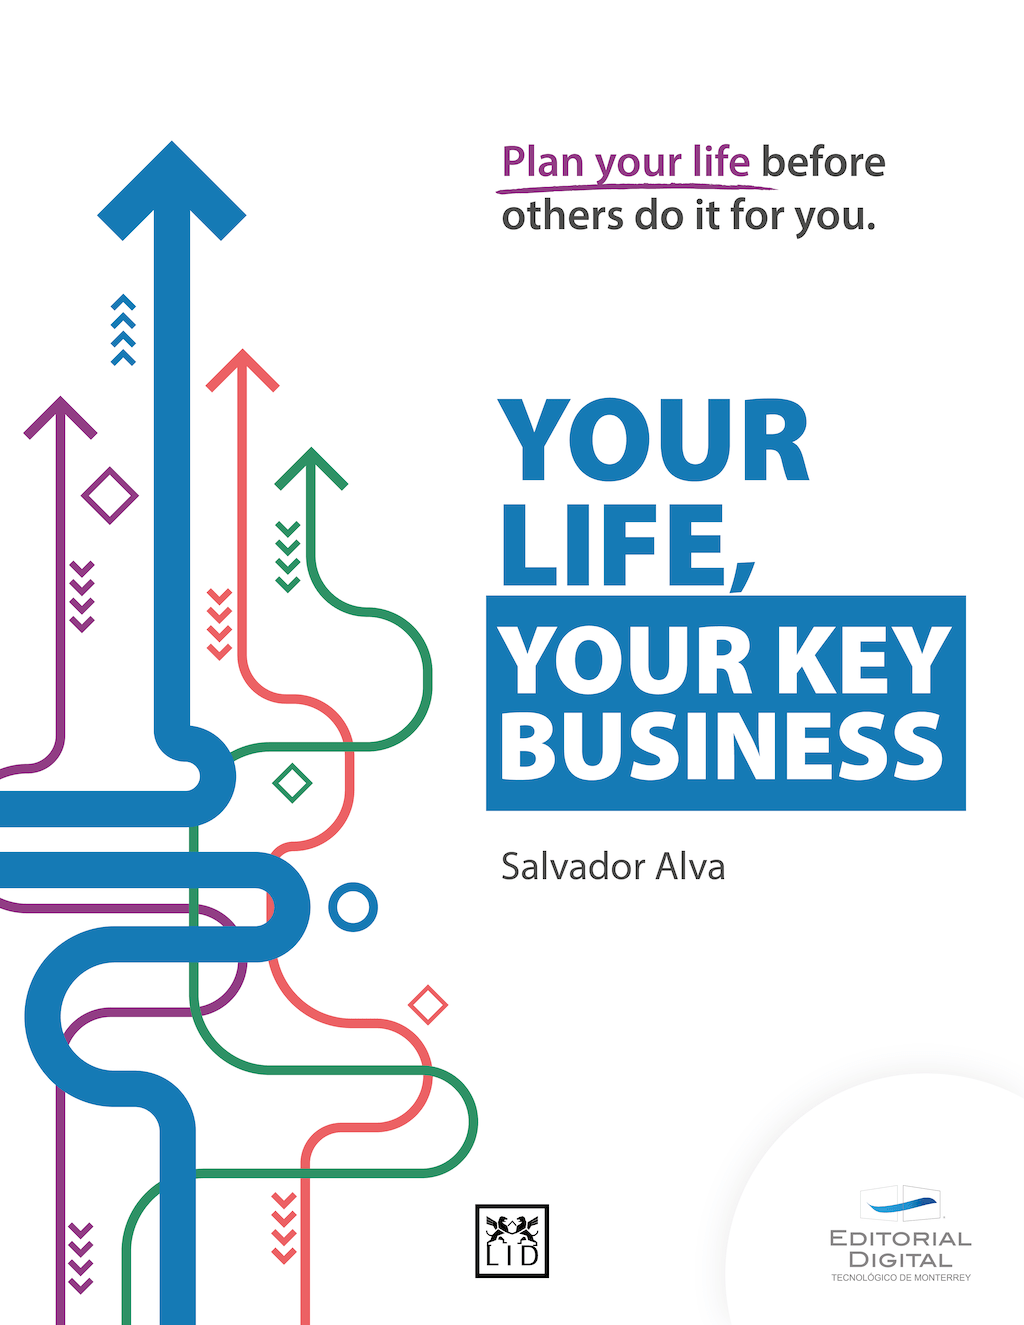 Your life, your key business